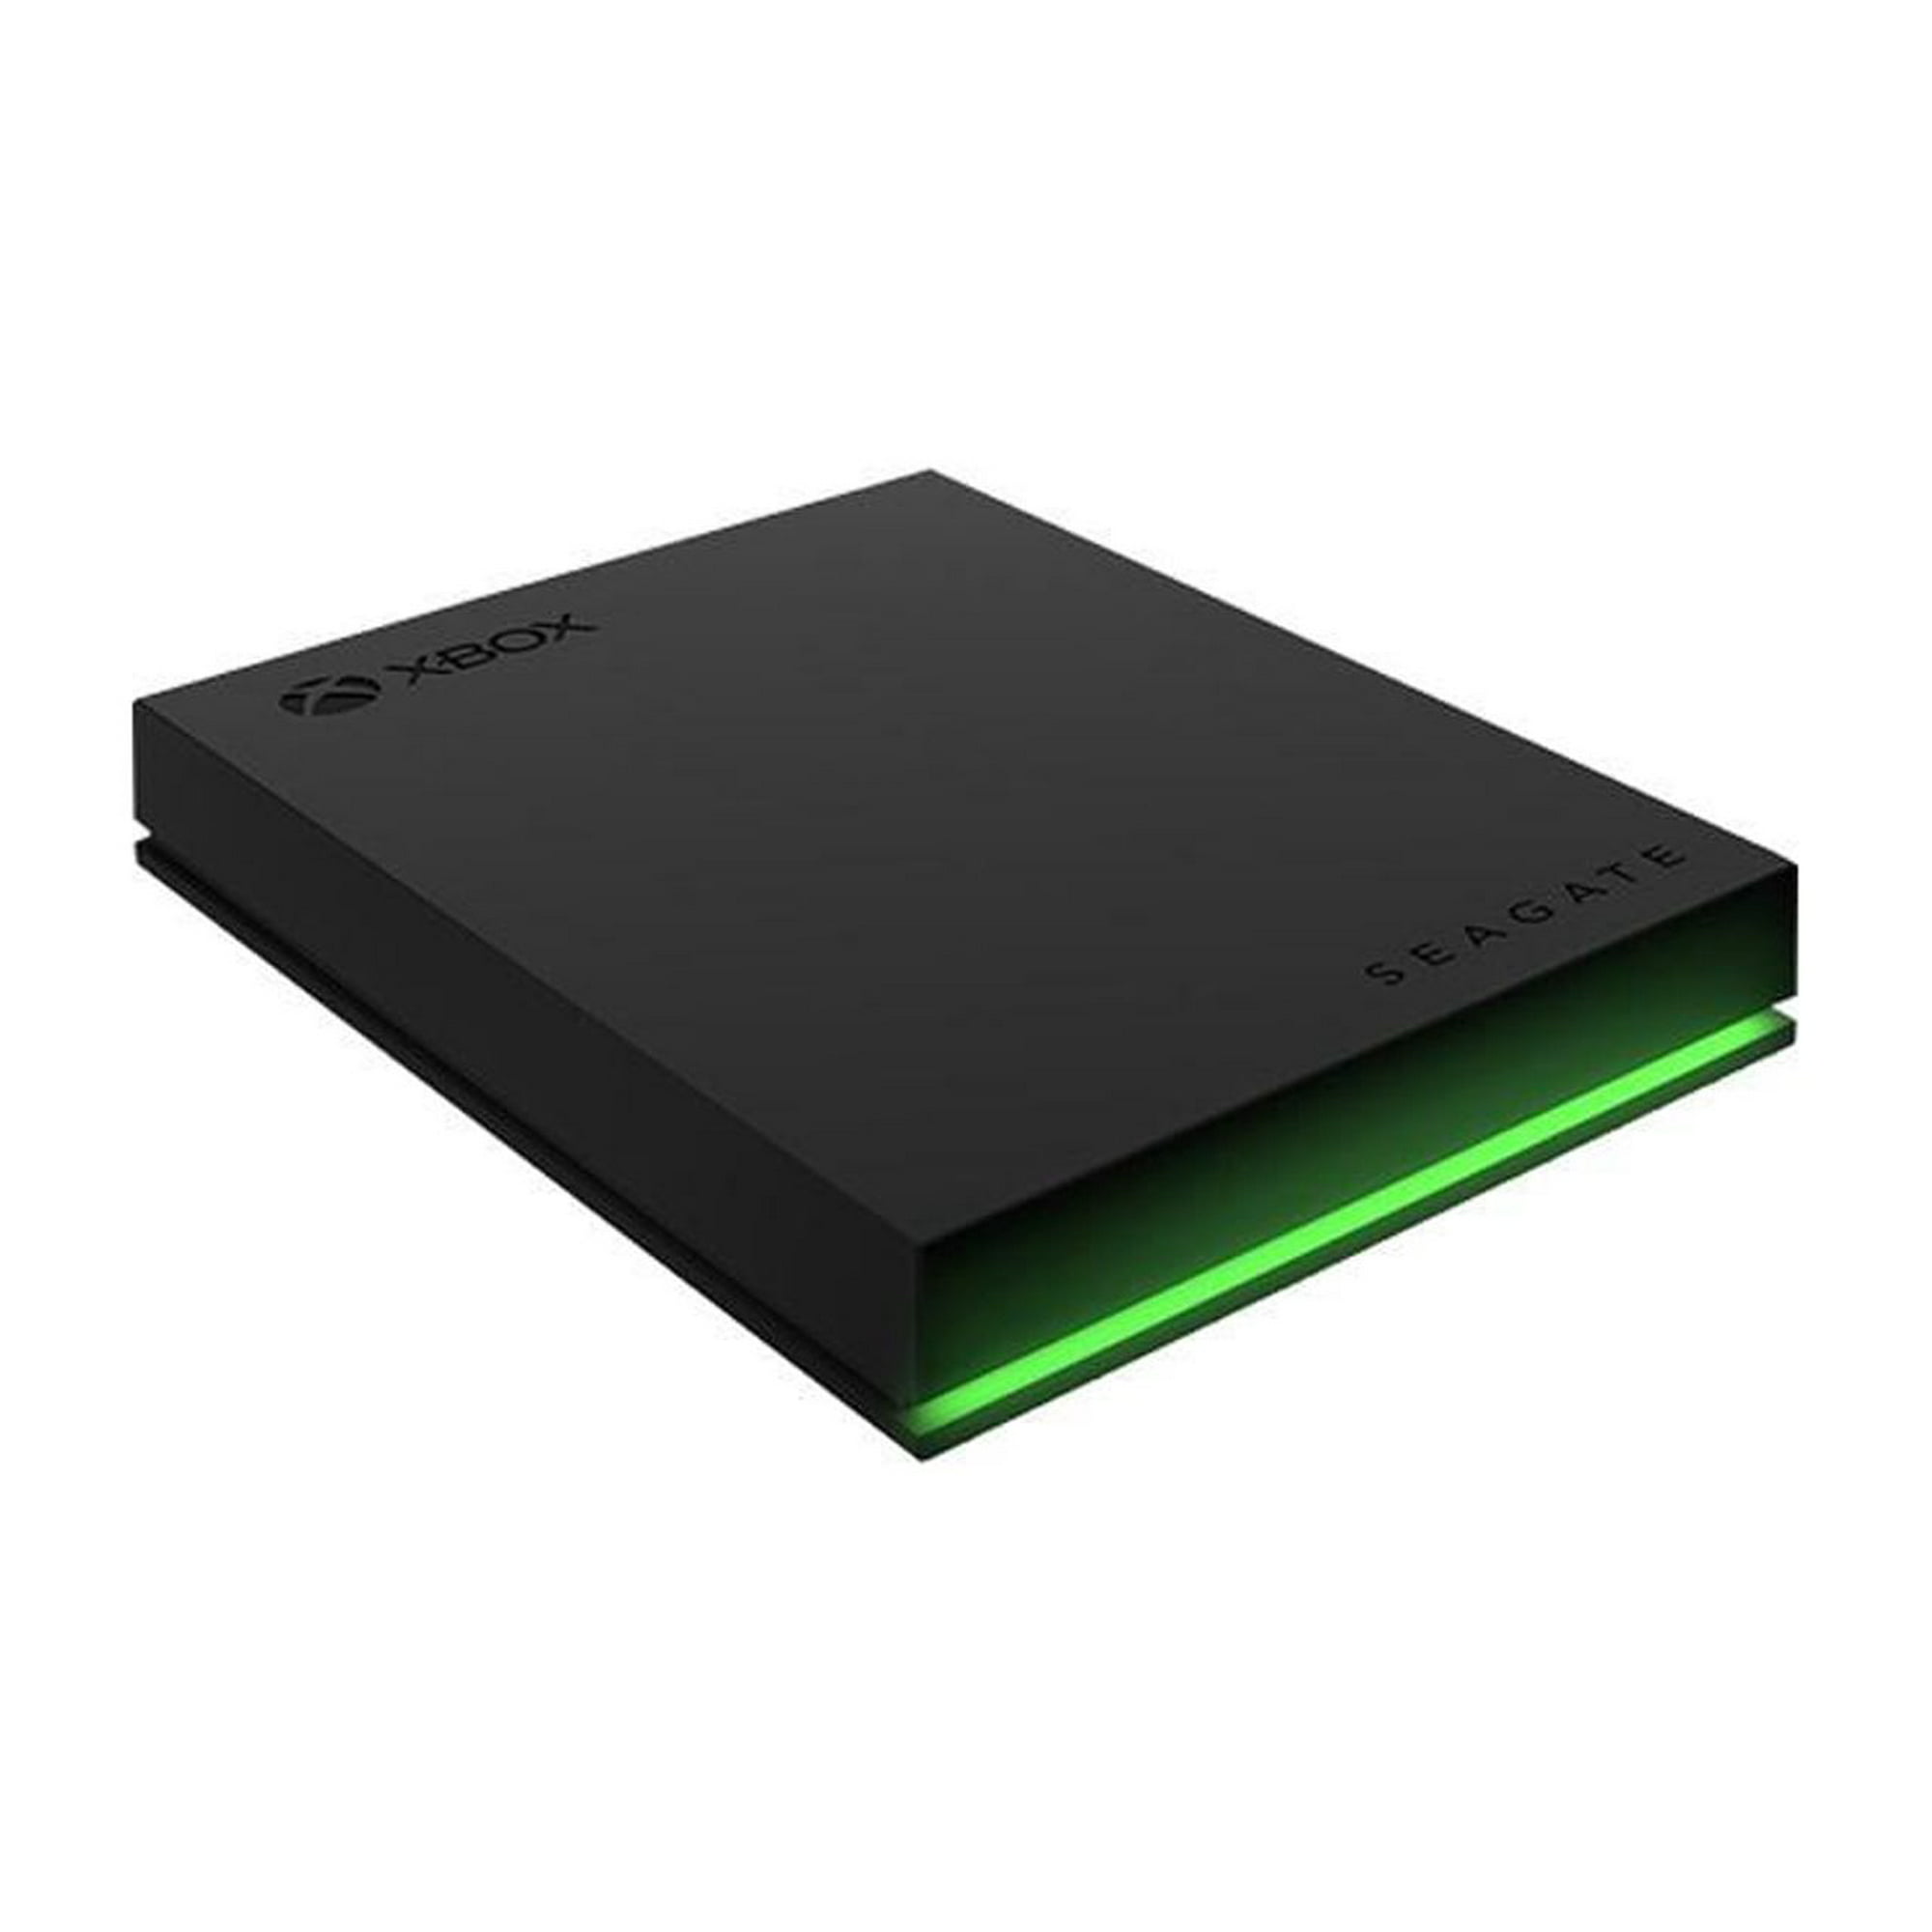 Seagate 4TB Game Drive for Xbox with Immersive LED Lighting USB 3.2 Gen 1 Model STKX4000402 Black